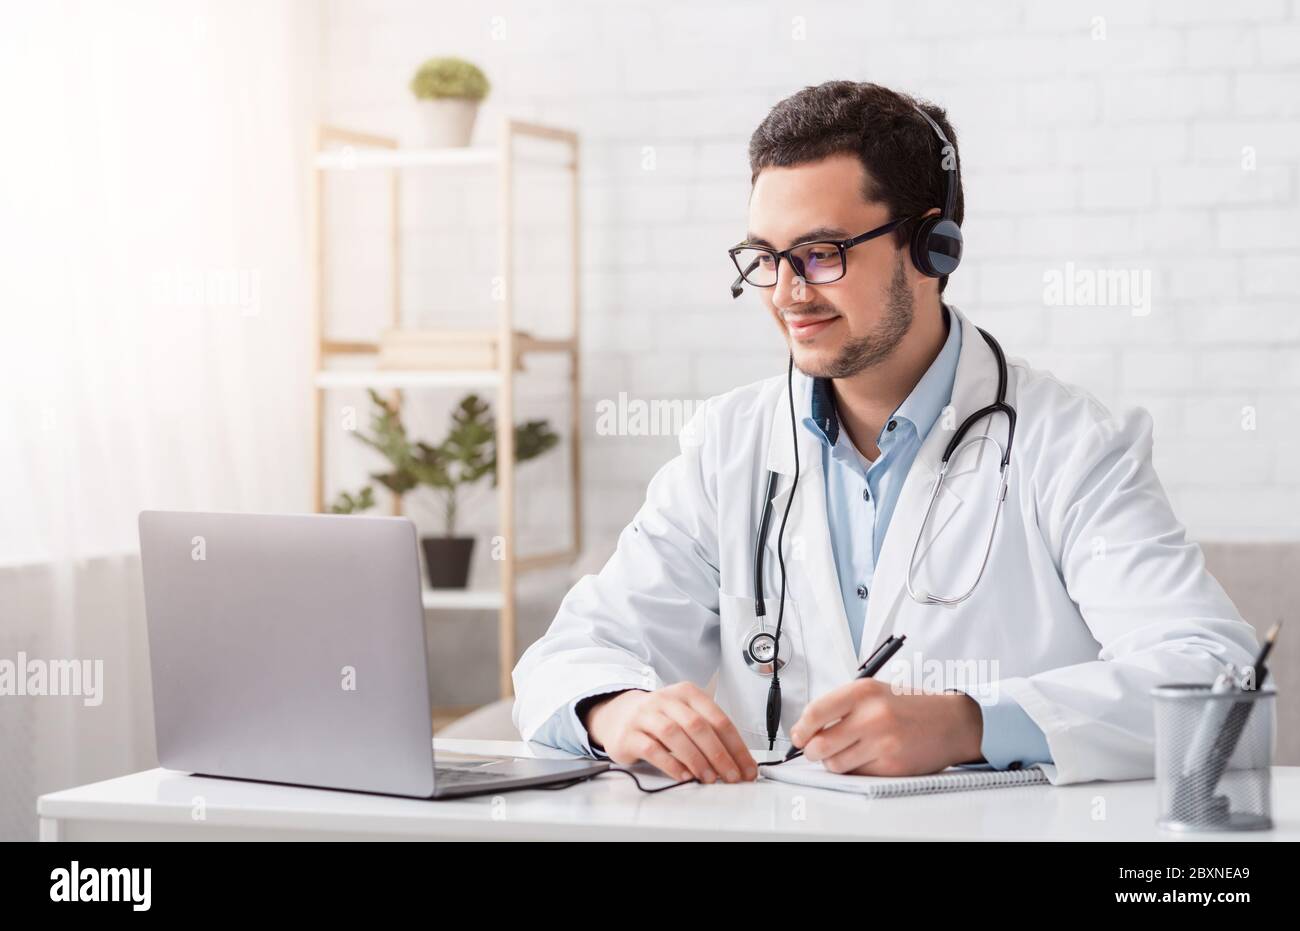 Online lessons and conferences. Doctor makes notes sitting at table with laptop Stock Photo